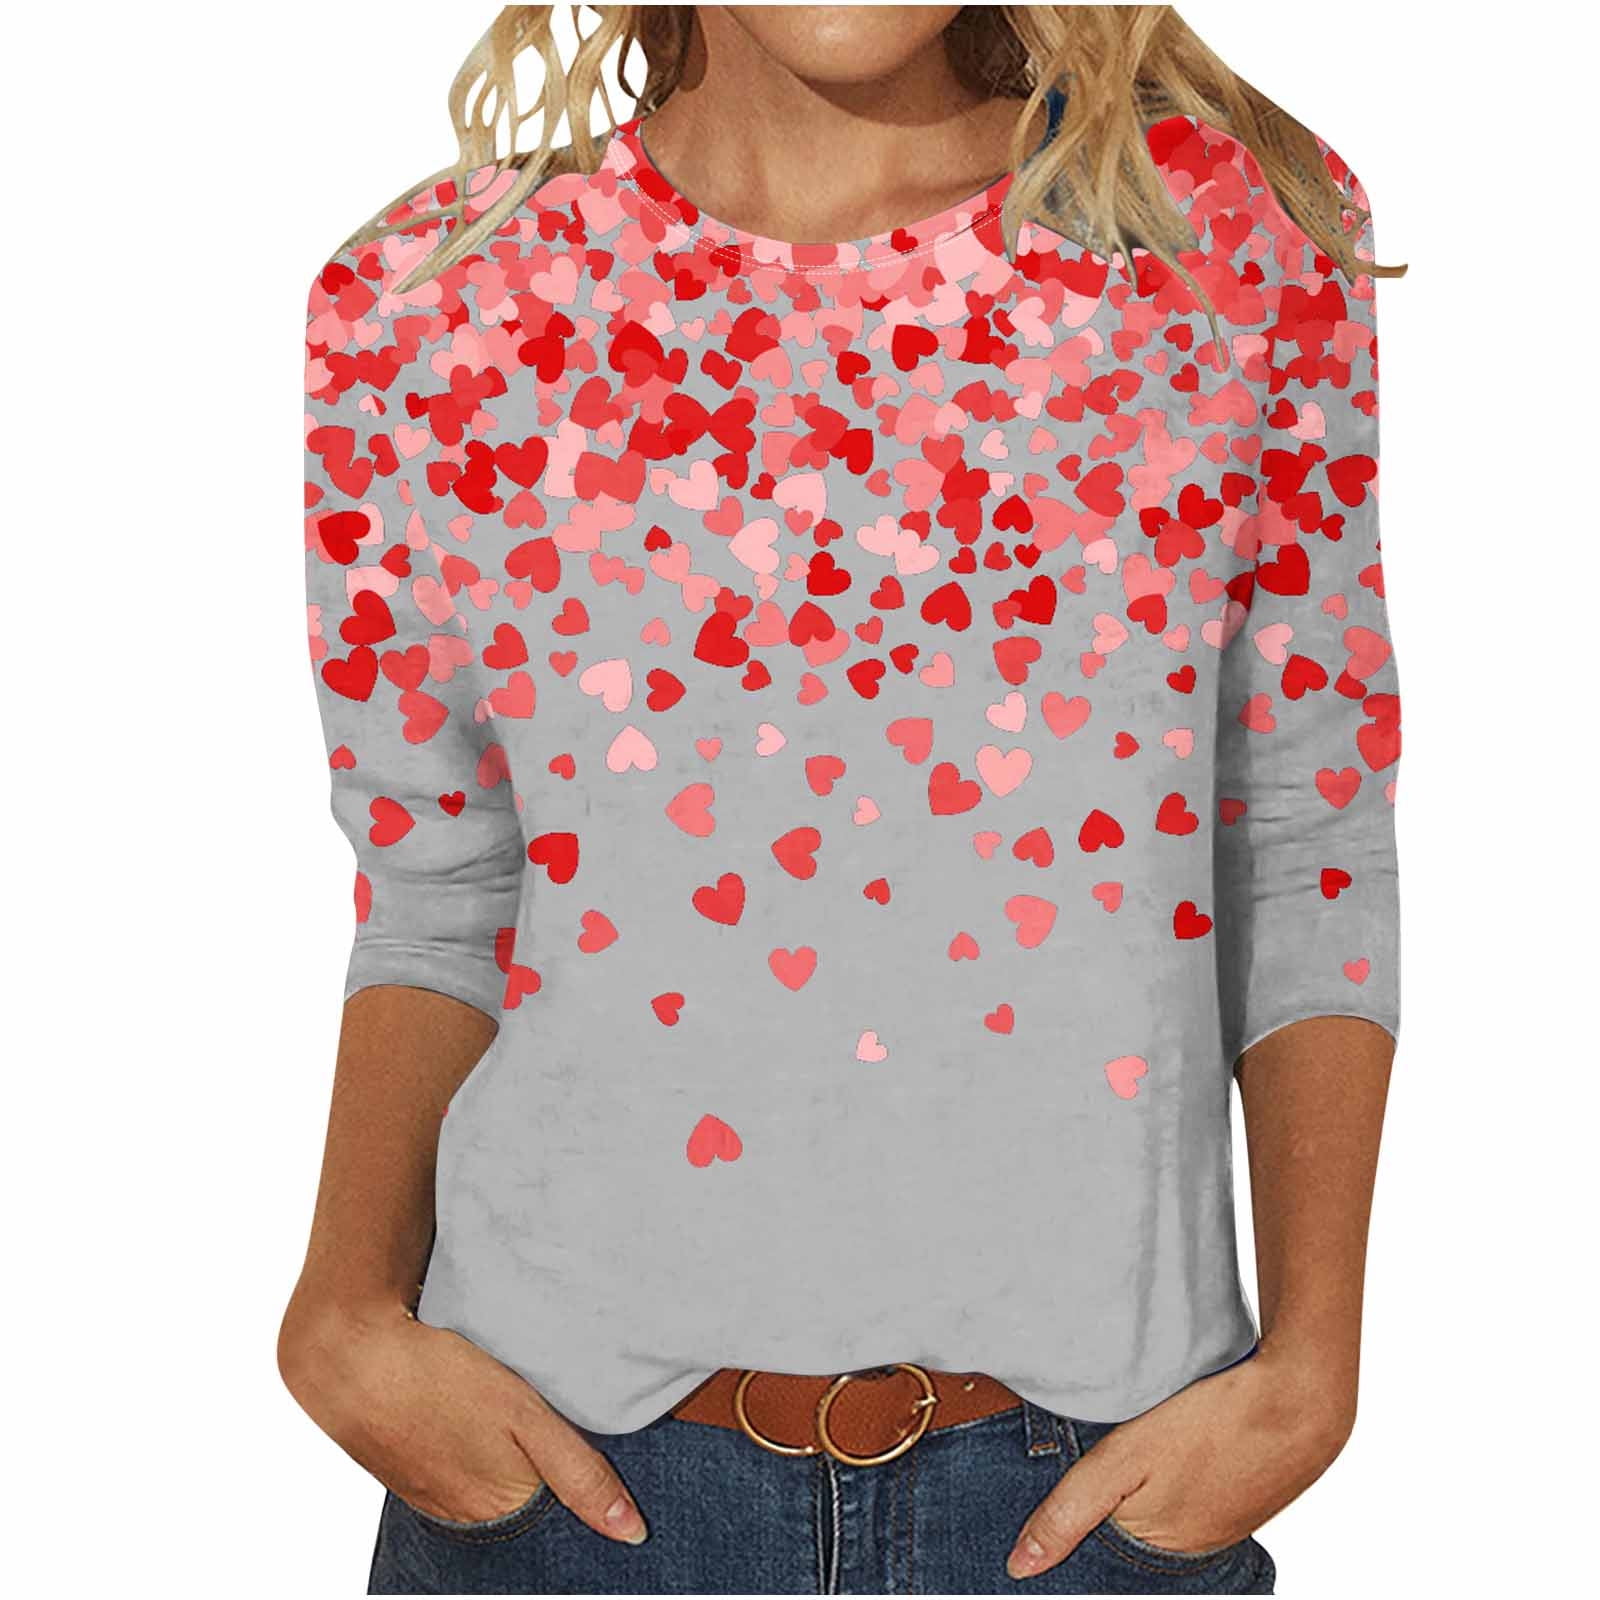 JUUYY Valentines Day Gift T-Shirts for Women Girls Dressy Casual Plus ...